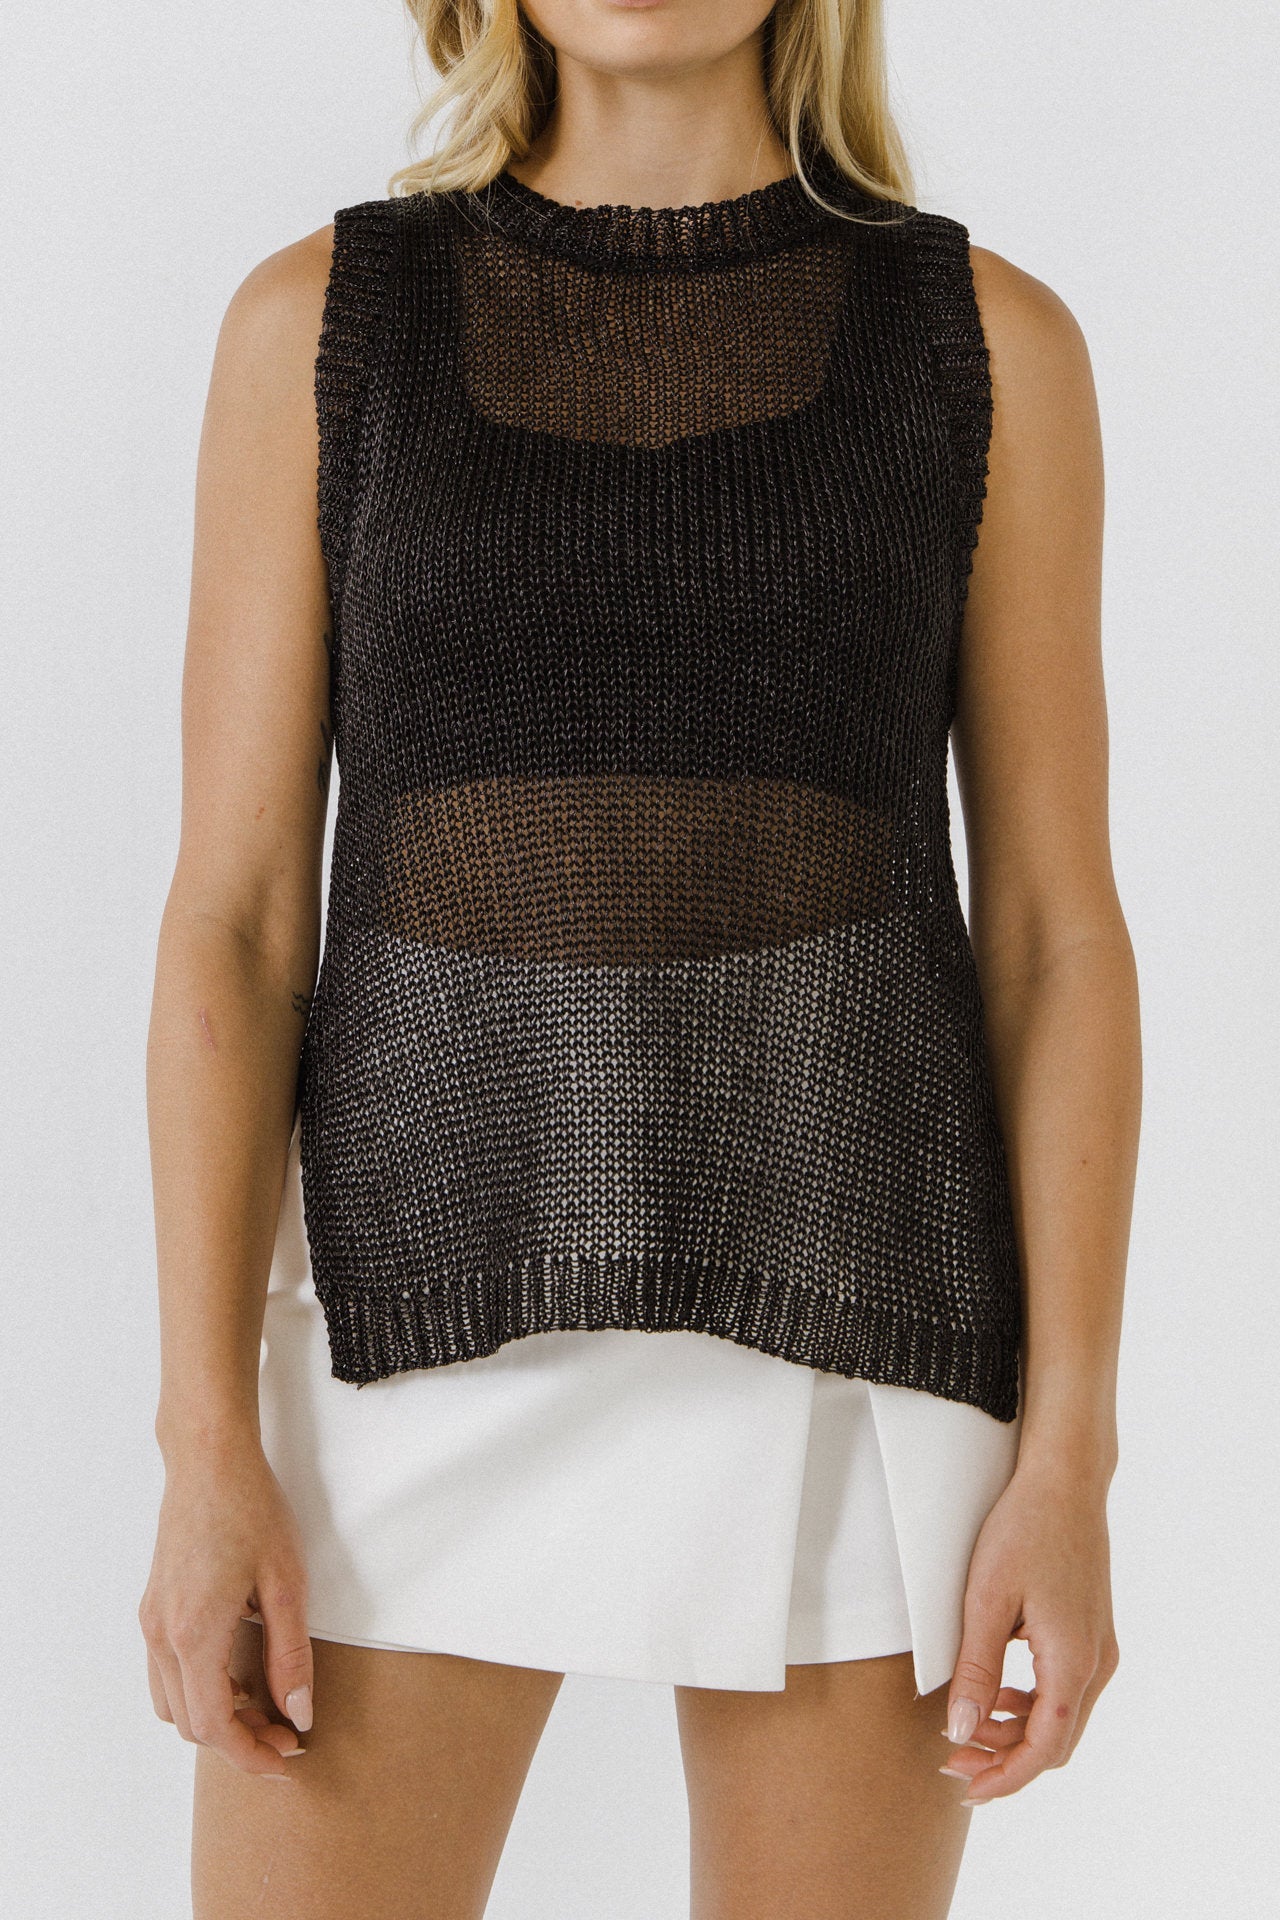 ENDLESS ROSE - Sleeveless Knit Sheer Top With Back Keyhole - CAMI TOPS & TANK available at Objectrare